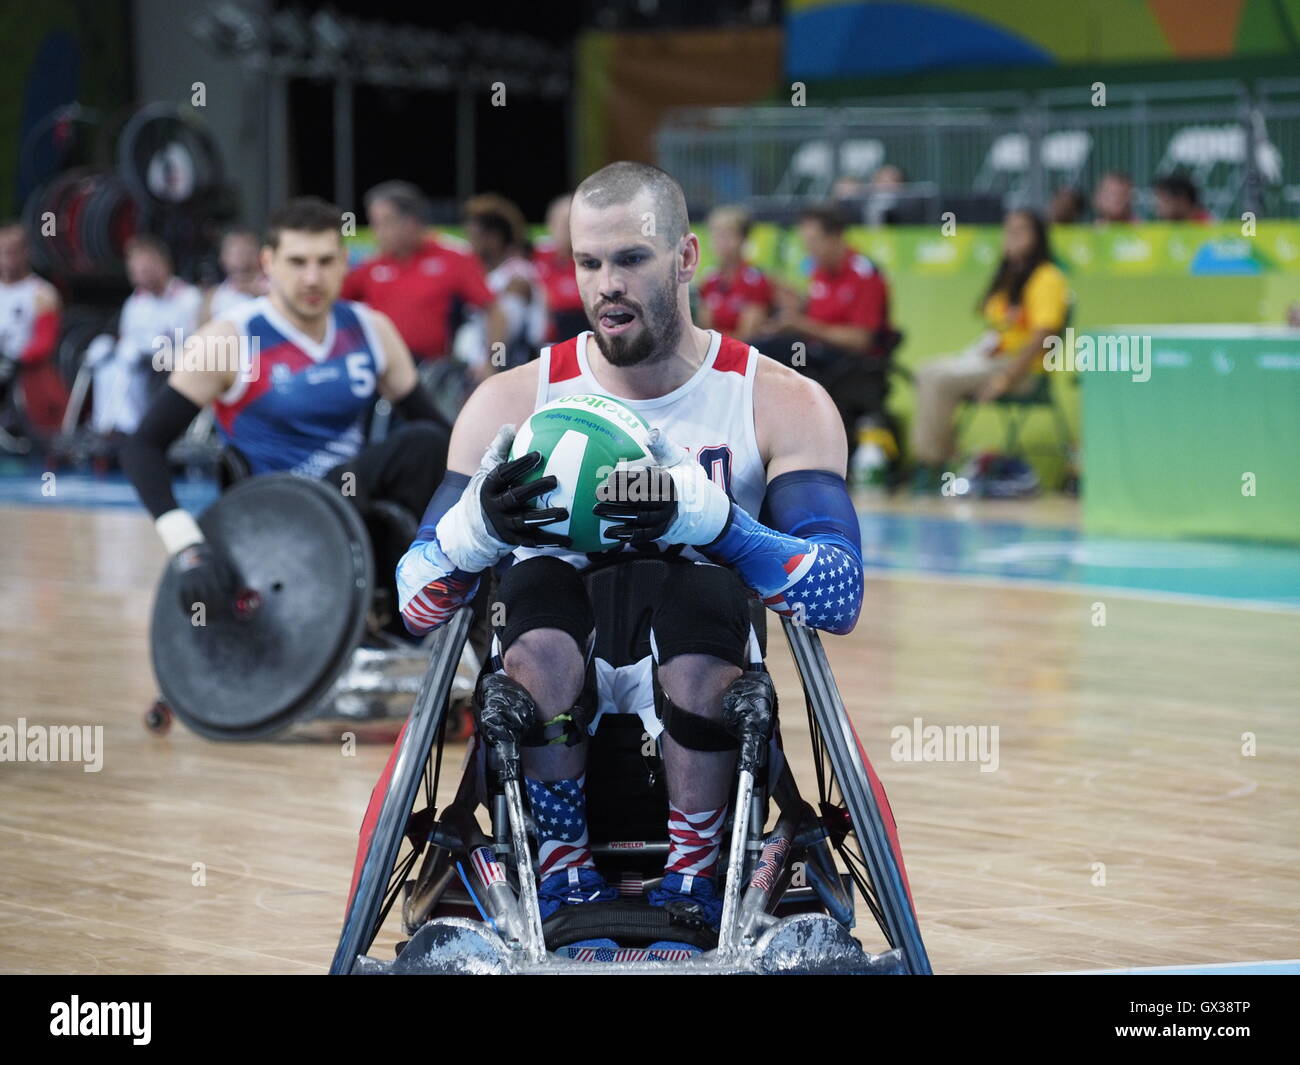 Rio de Janeiro, Brazil. 14th September, 2016. Rio Paralympic Games 2016. Opening match of the Wheelchair Rugby Pool B between the United States and France. Credit:  PhotoAbility/Alamy Live News Stock Photo